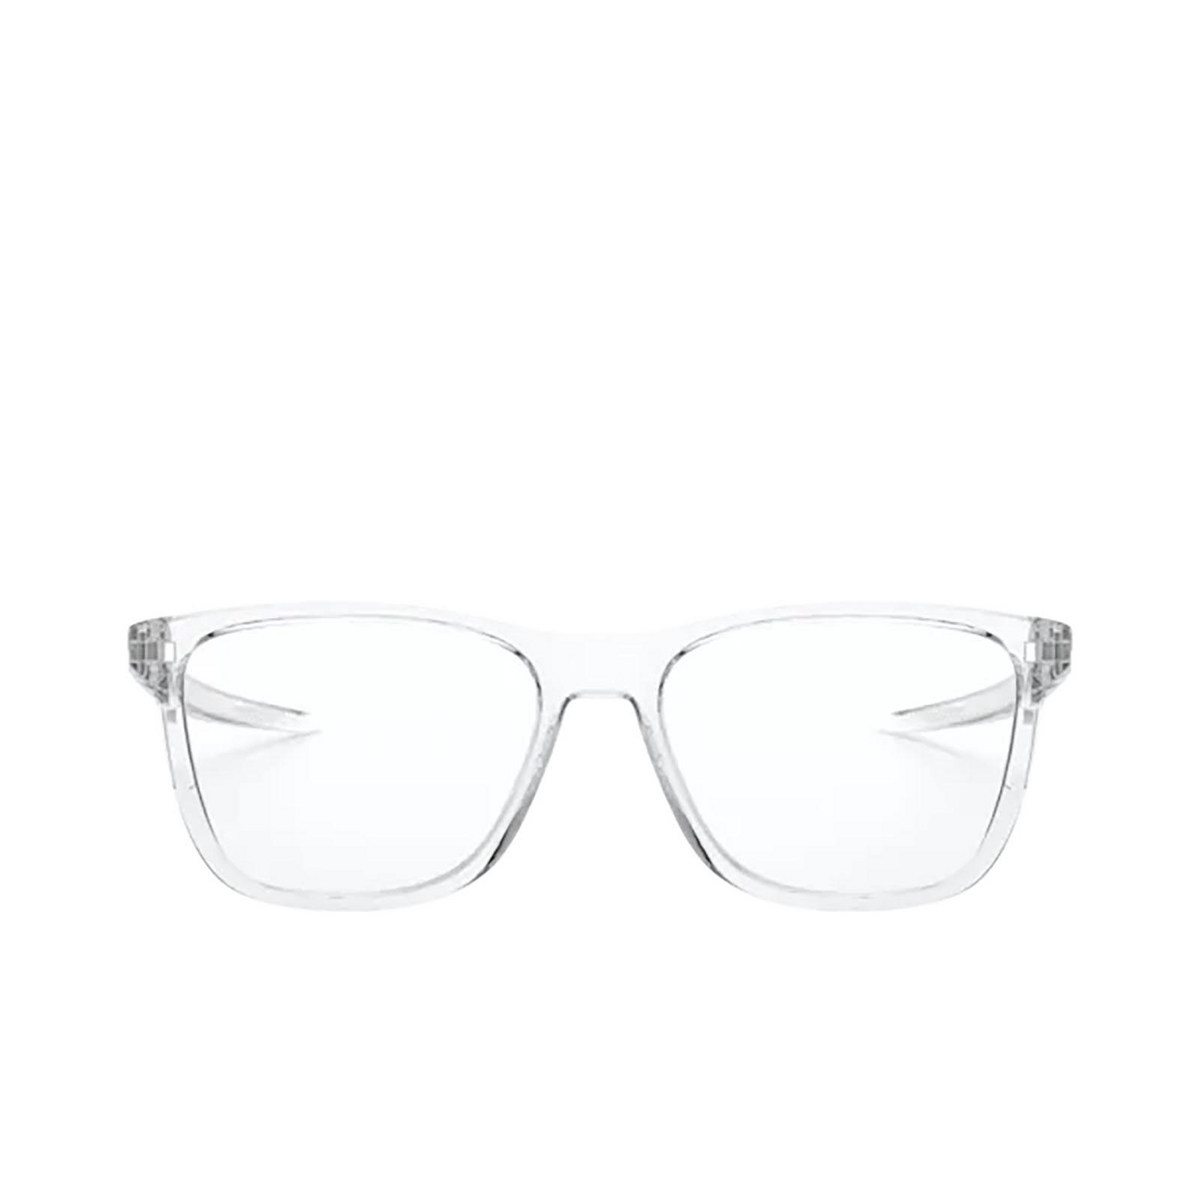 Oakley® Rectangle Eyeglasses: Centerboard OX8163 color Polished Clear 816303 - front view.